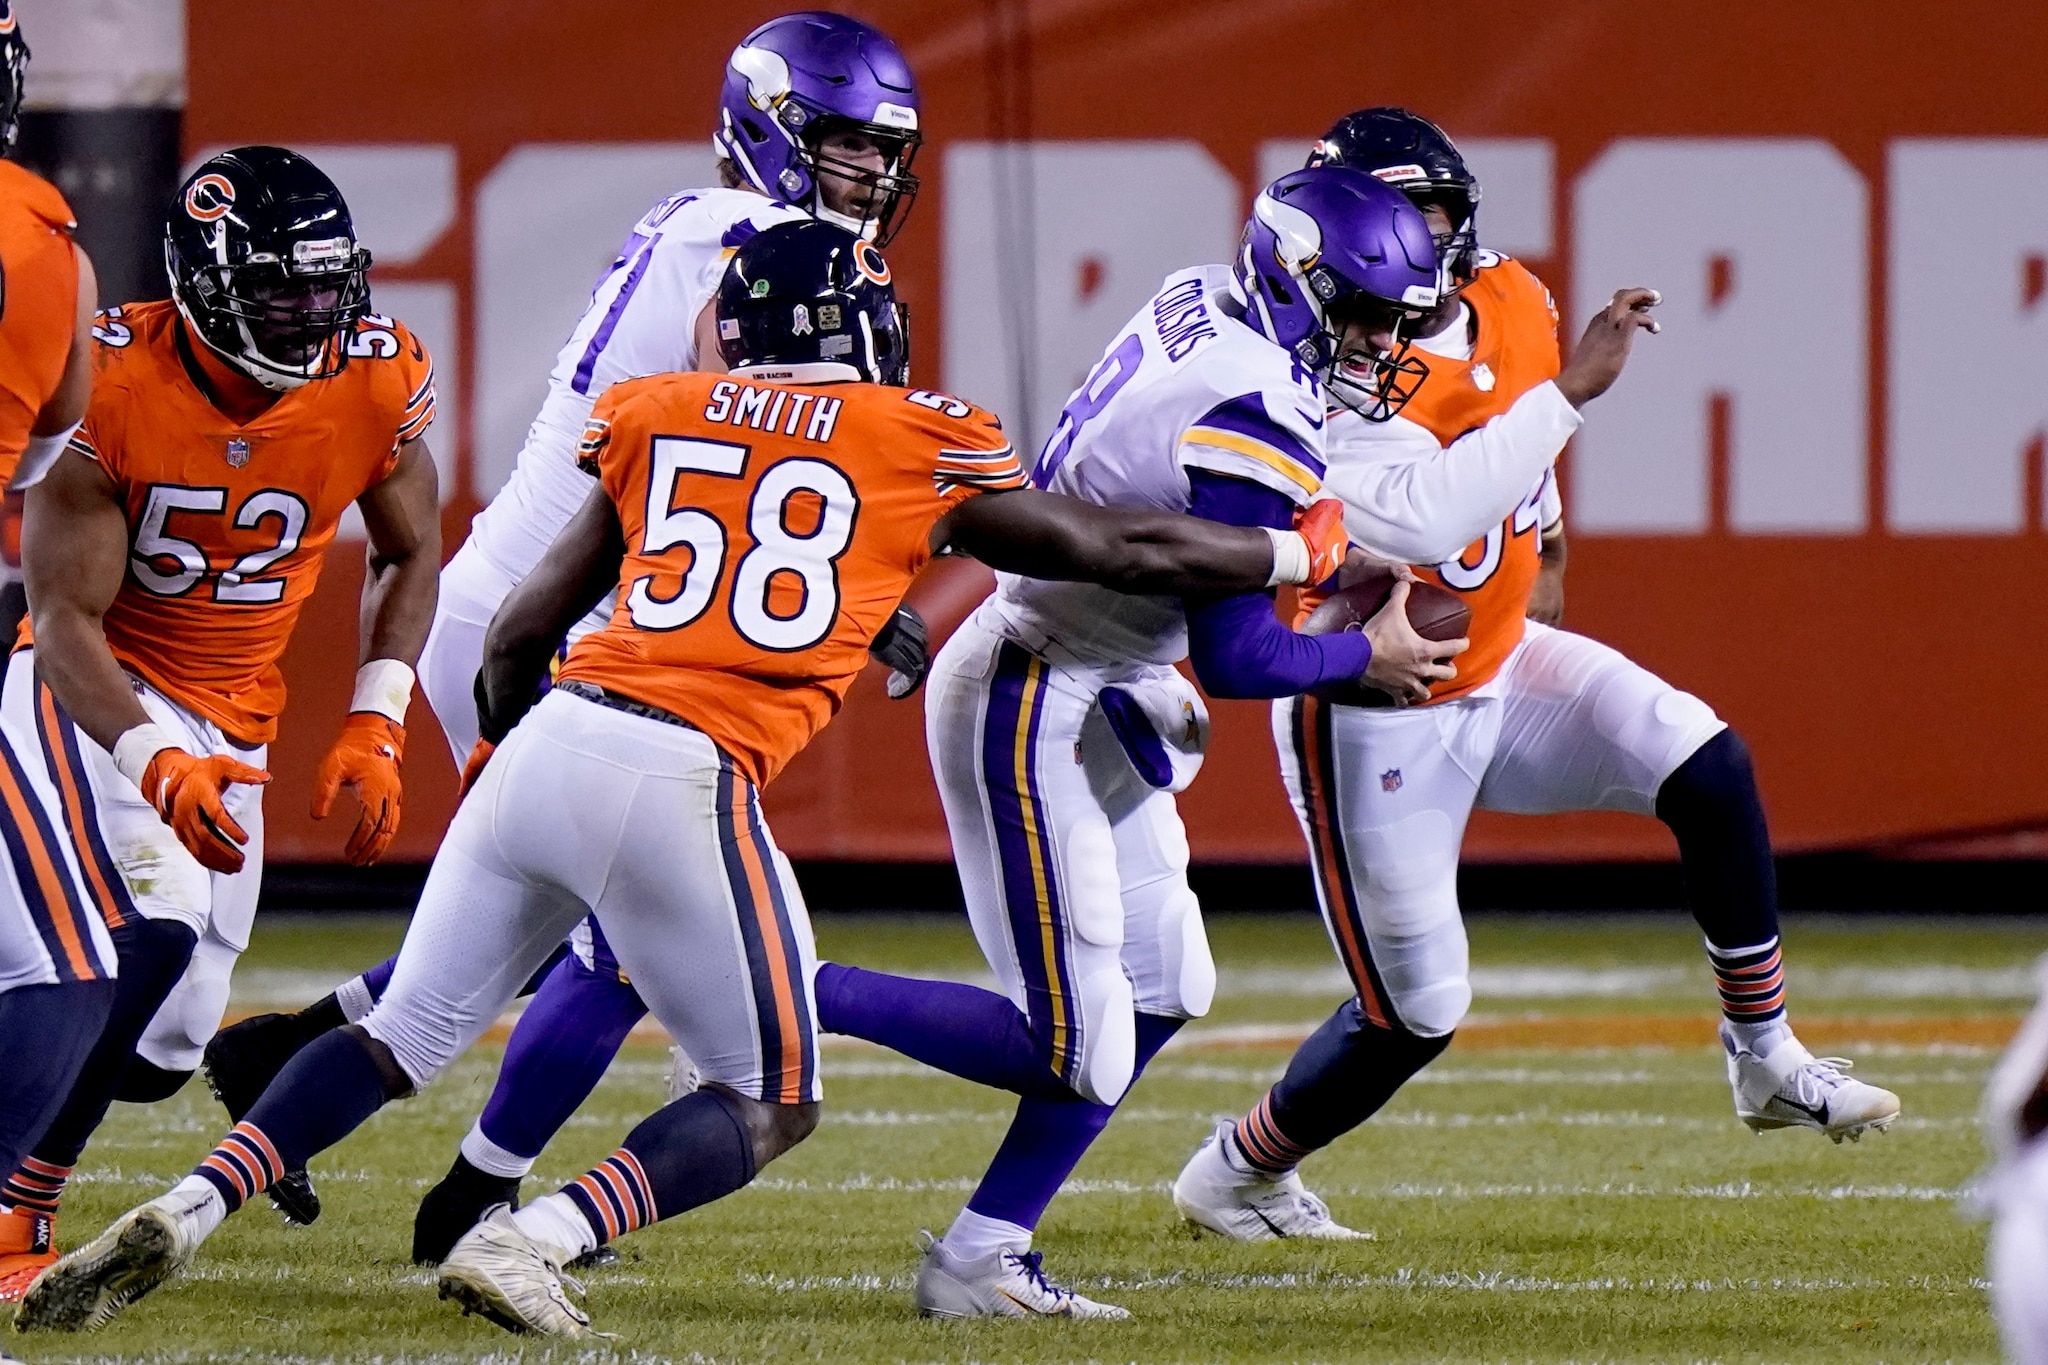 Bears vs Vikings Live Streaming, When and Where to Watch Bear vs